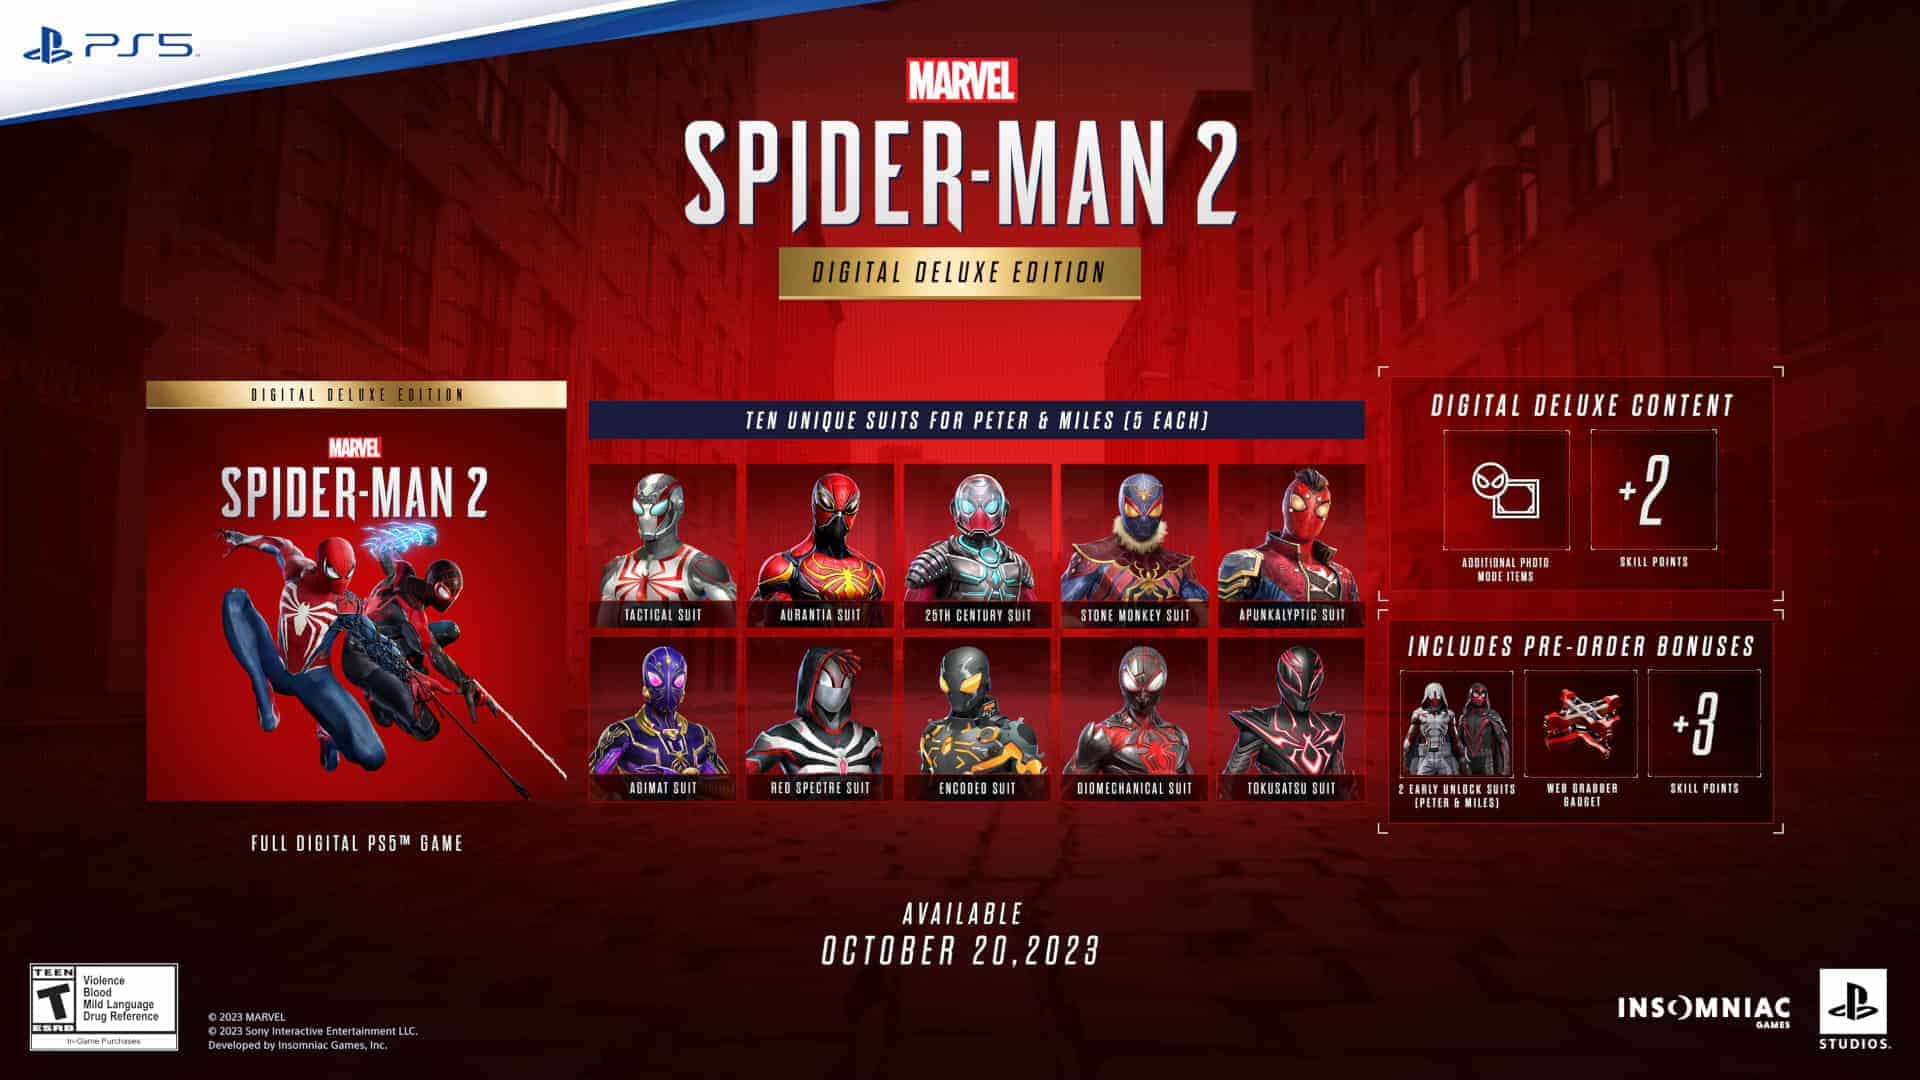 Marvel's Spider-Man 2 Deluxe Edition – PS5 showing the unique suits and skill points you unlock